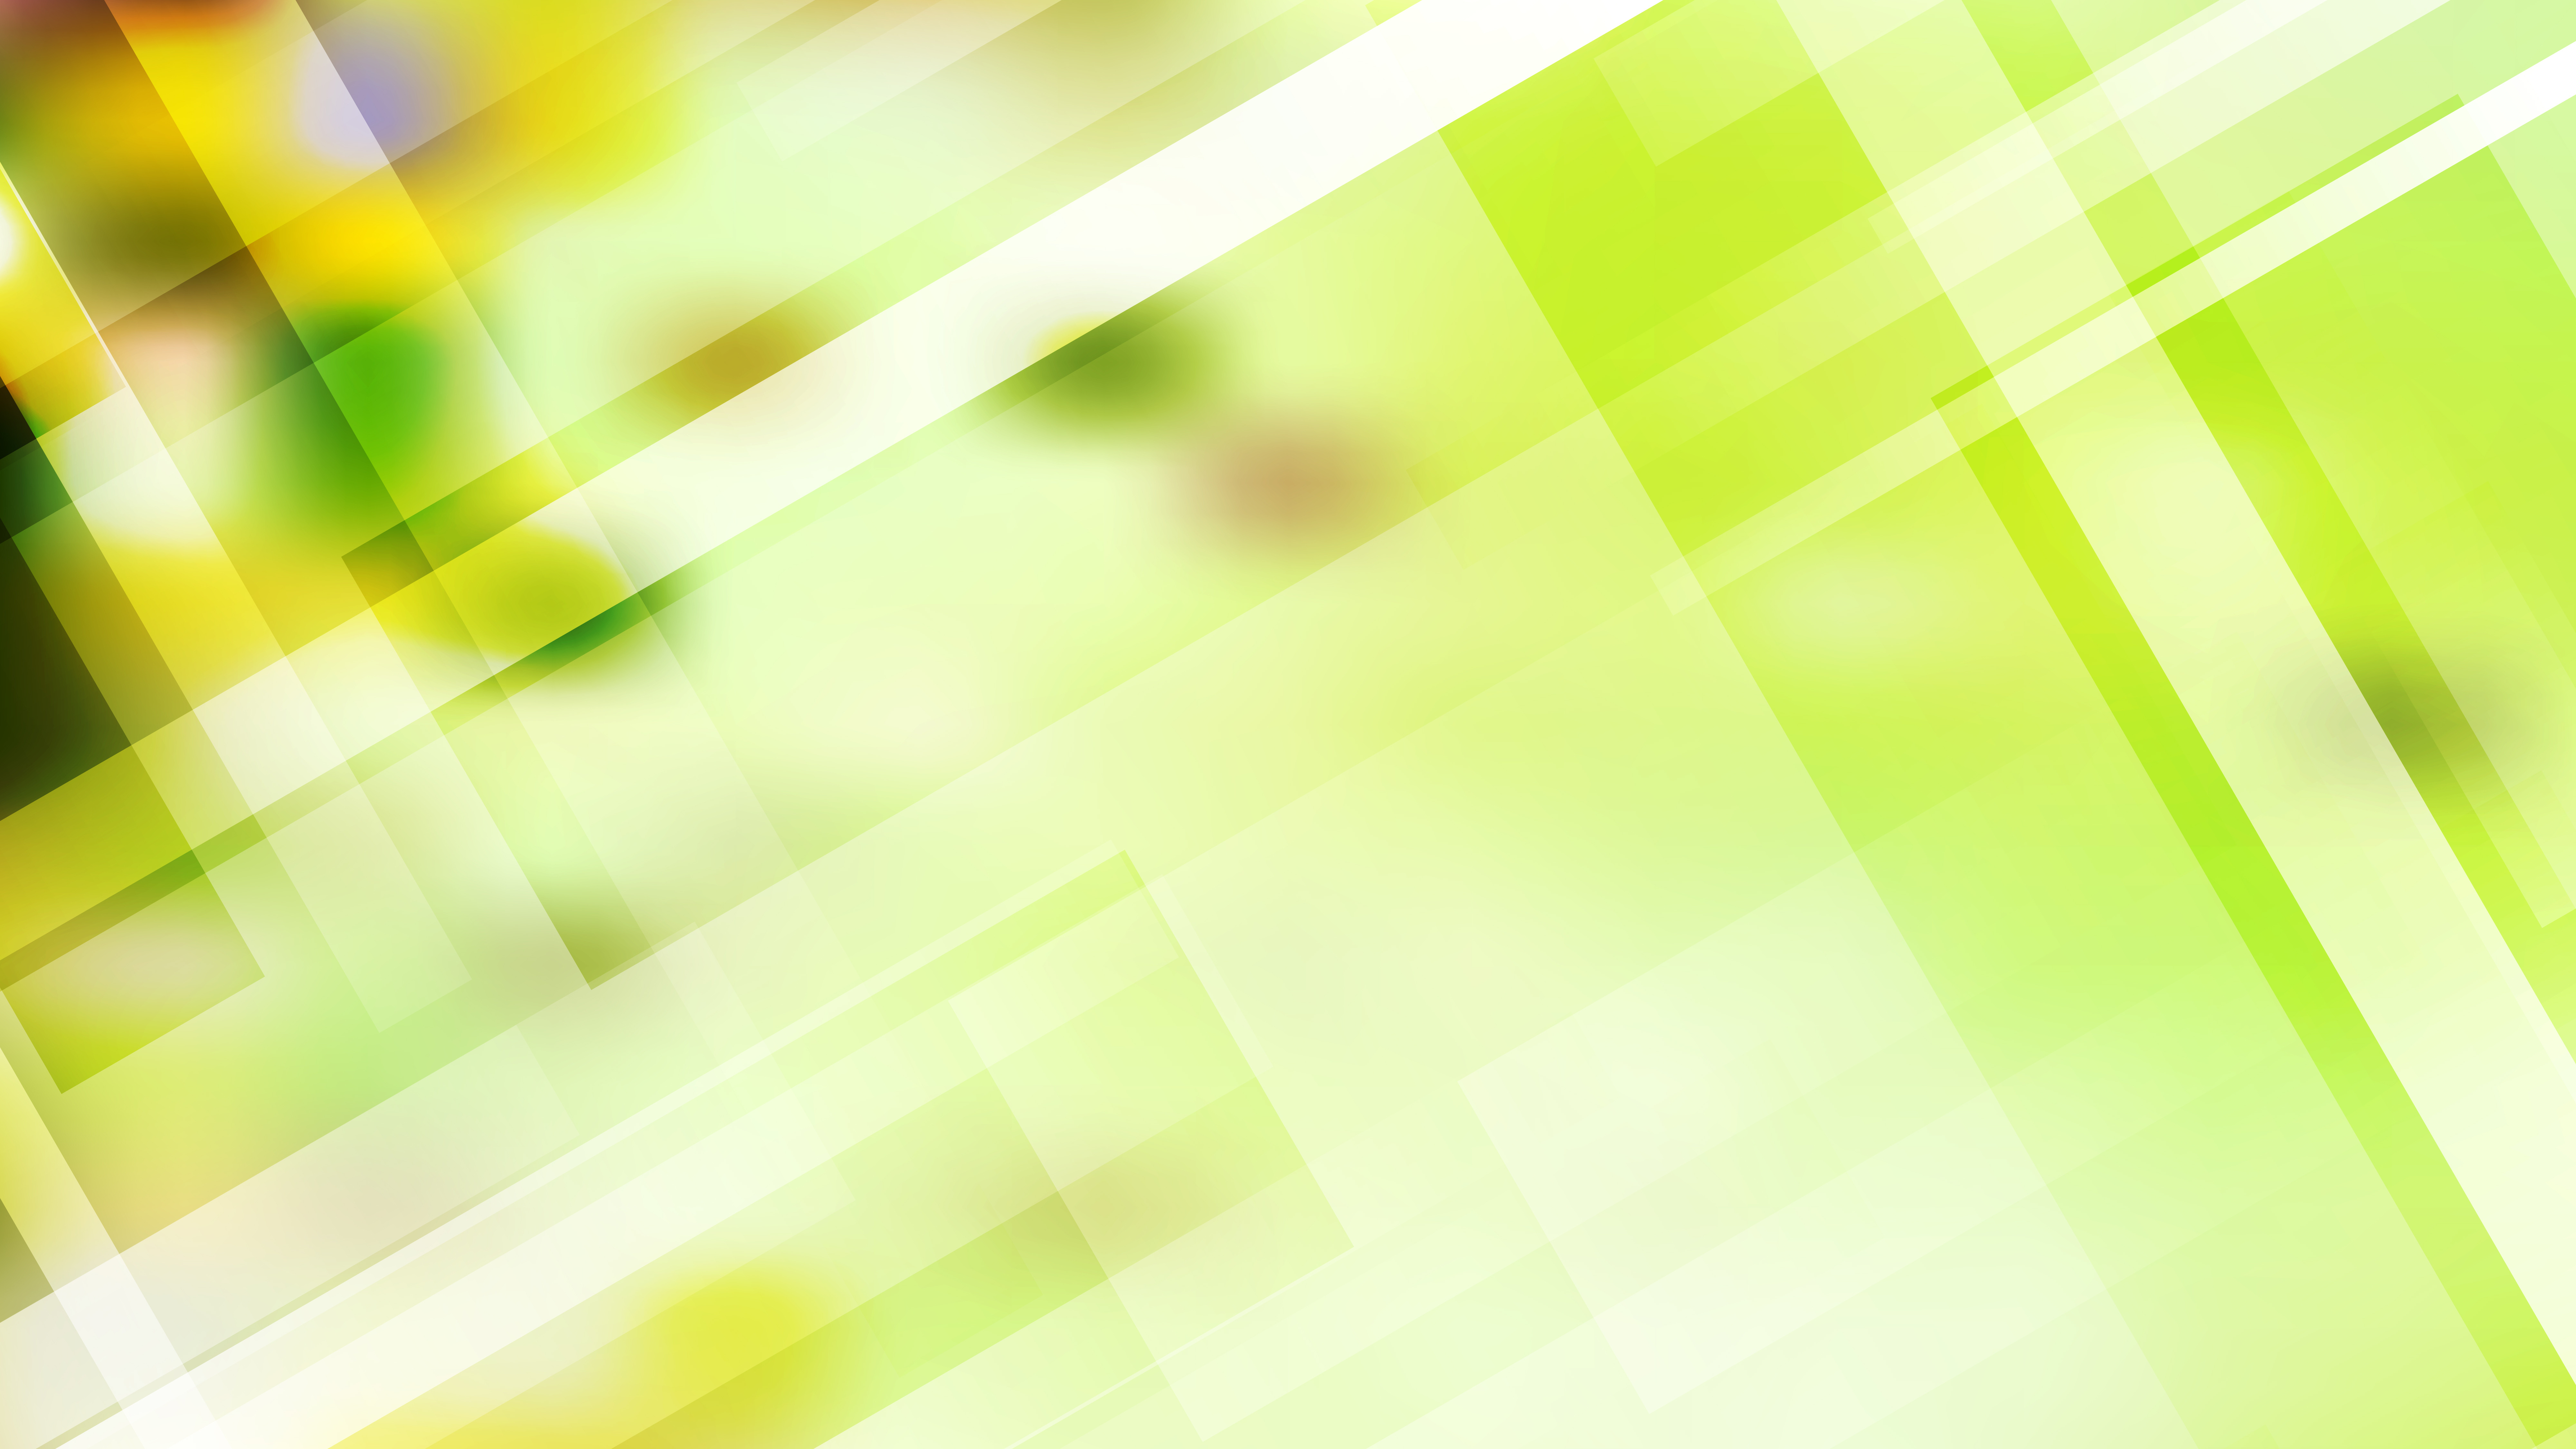 Free Abstract Light Green Geometric Background Illustration